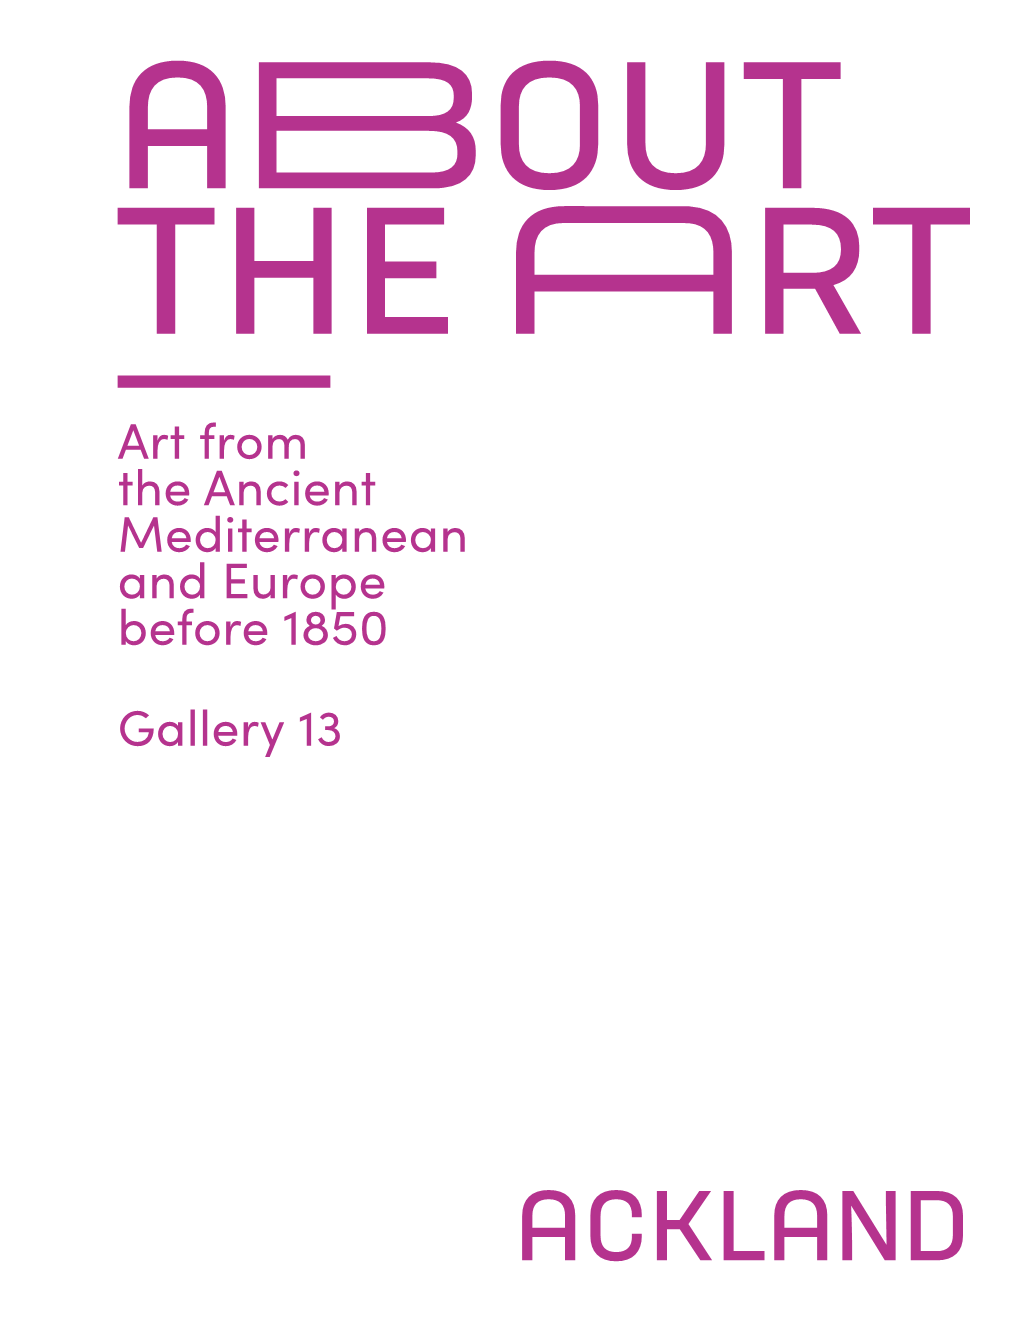 Art from the Ancient Mediterranean and Europe Before 1850